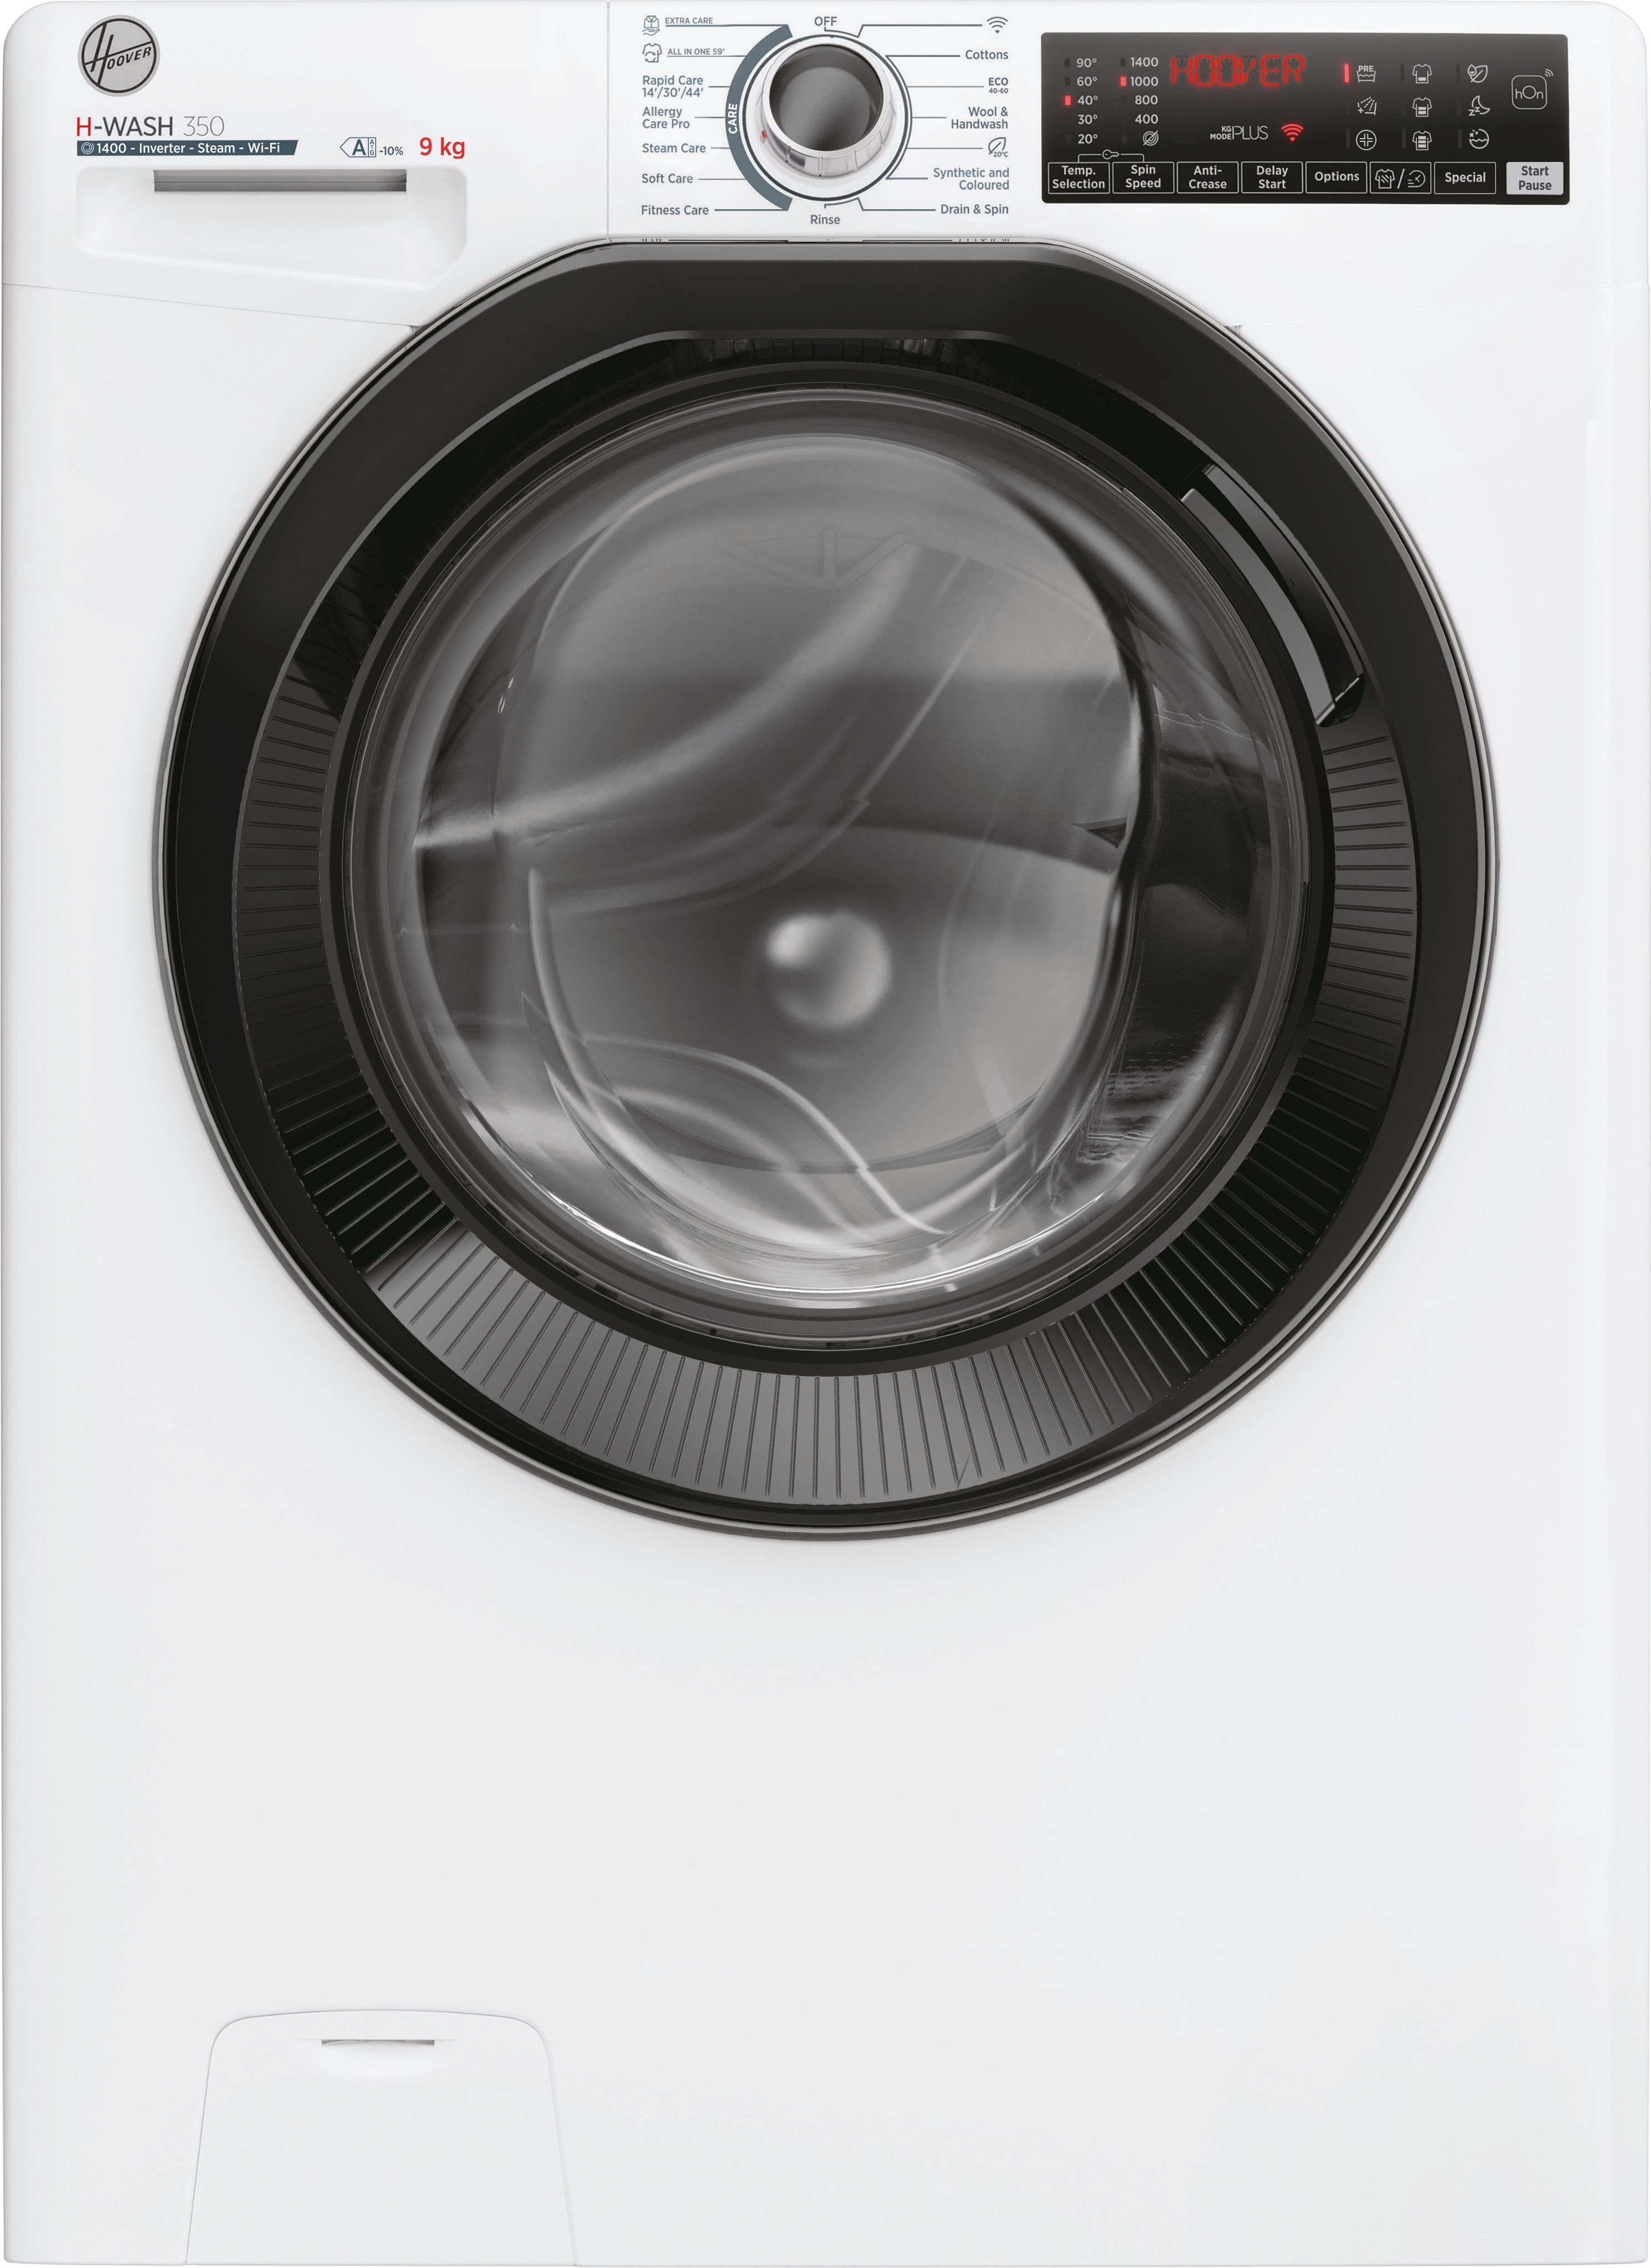 Hoover H-WASH 350 H3WPS4106TMB6-80 10kg Washing Machine with 1400 rpm - White - A Rated, White